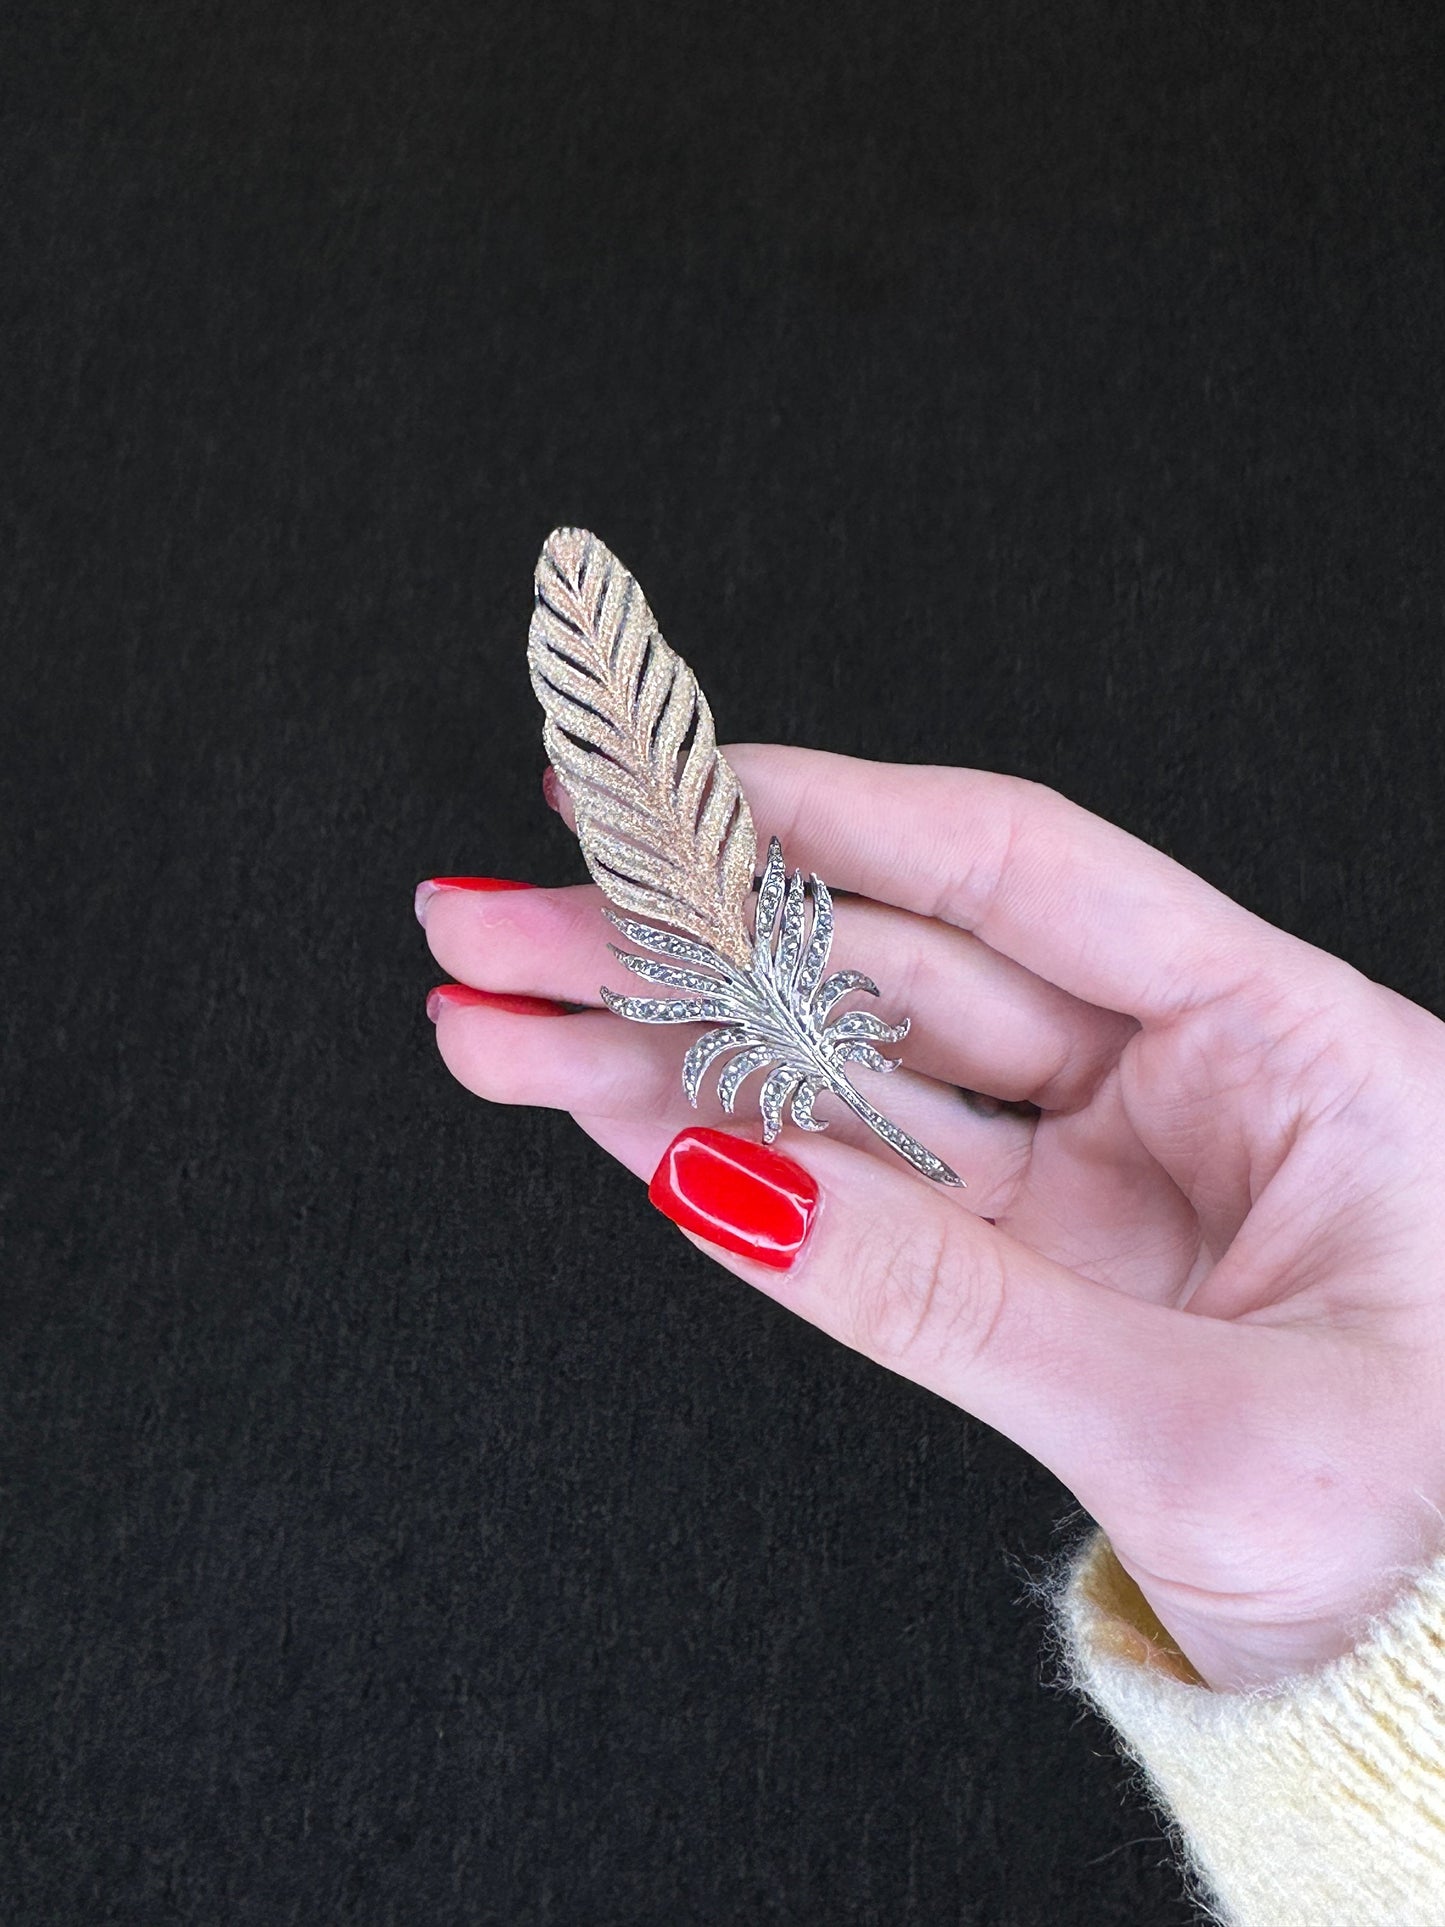 Art Deco Sterling Silver Brooch Large Feather Gold Accent Marcasite